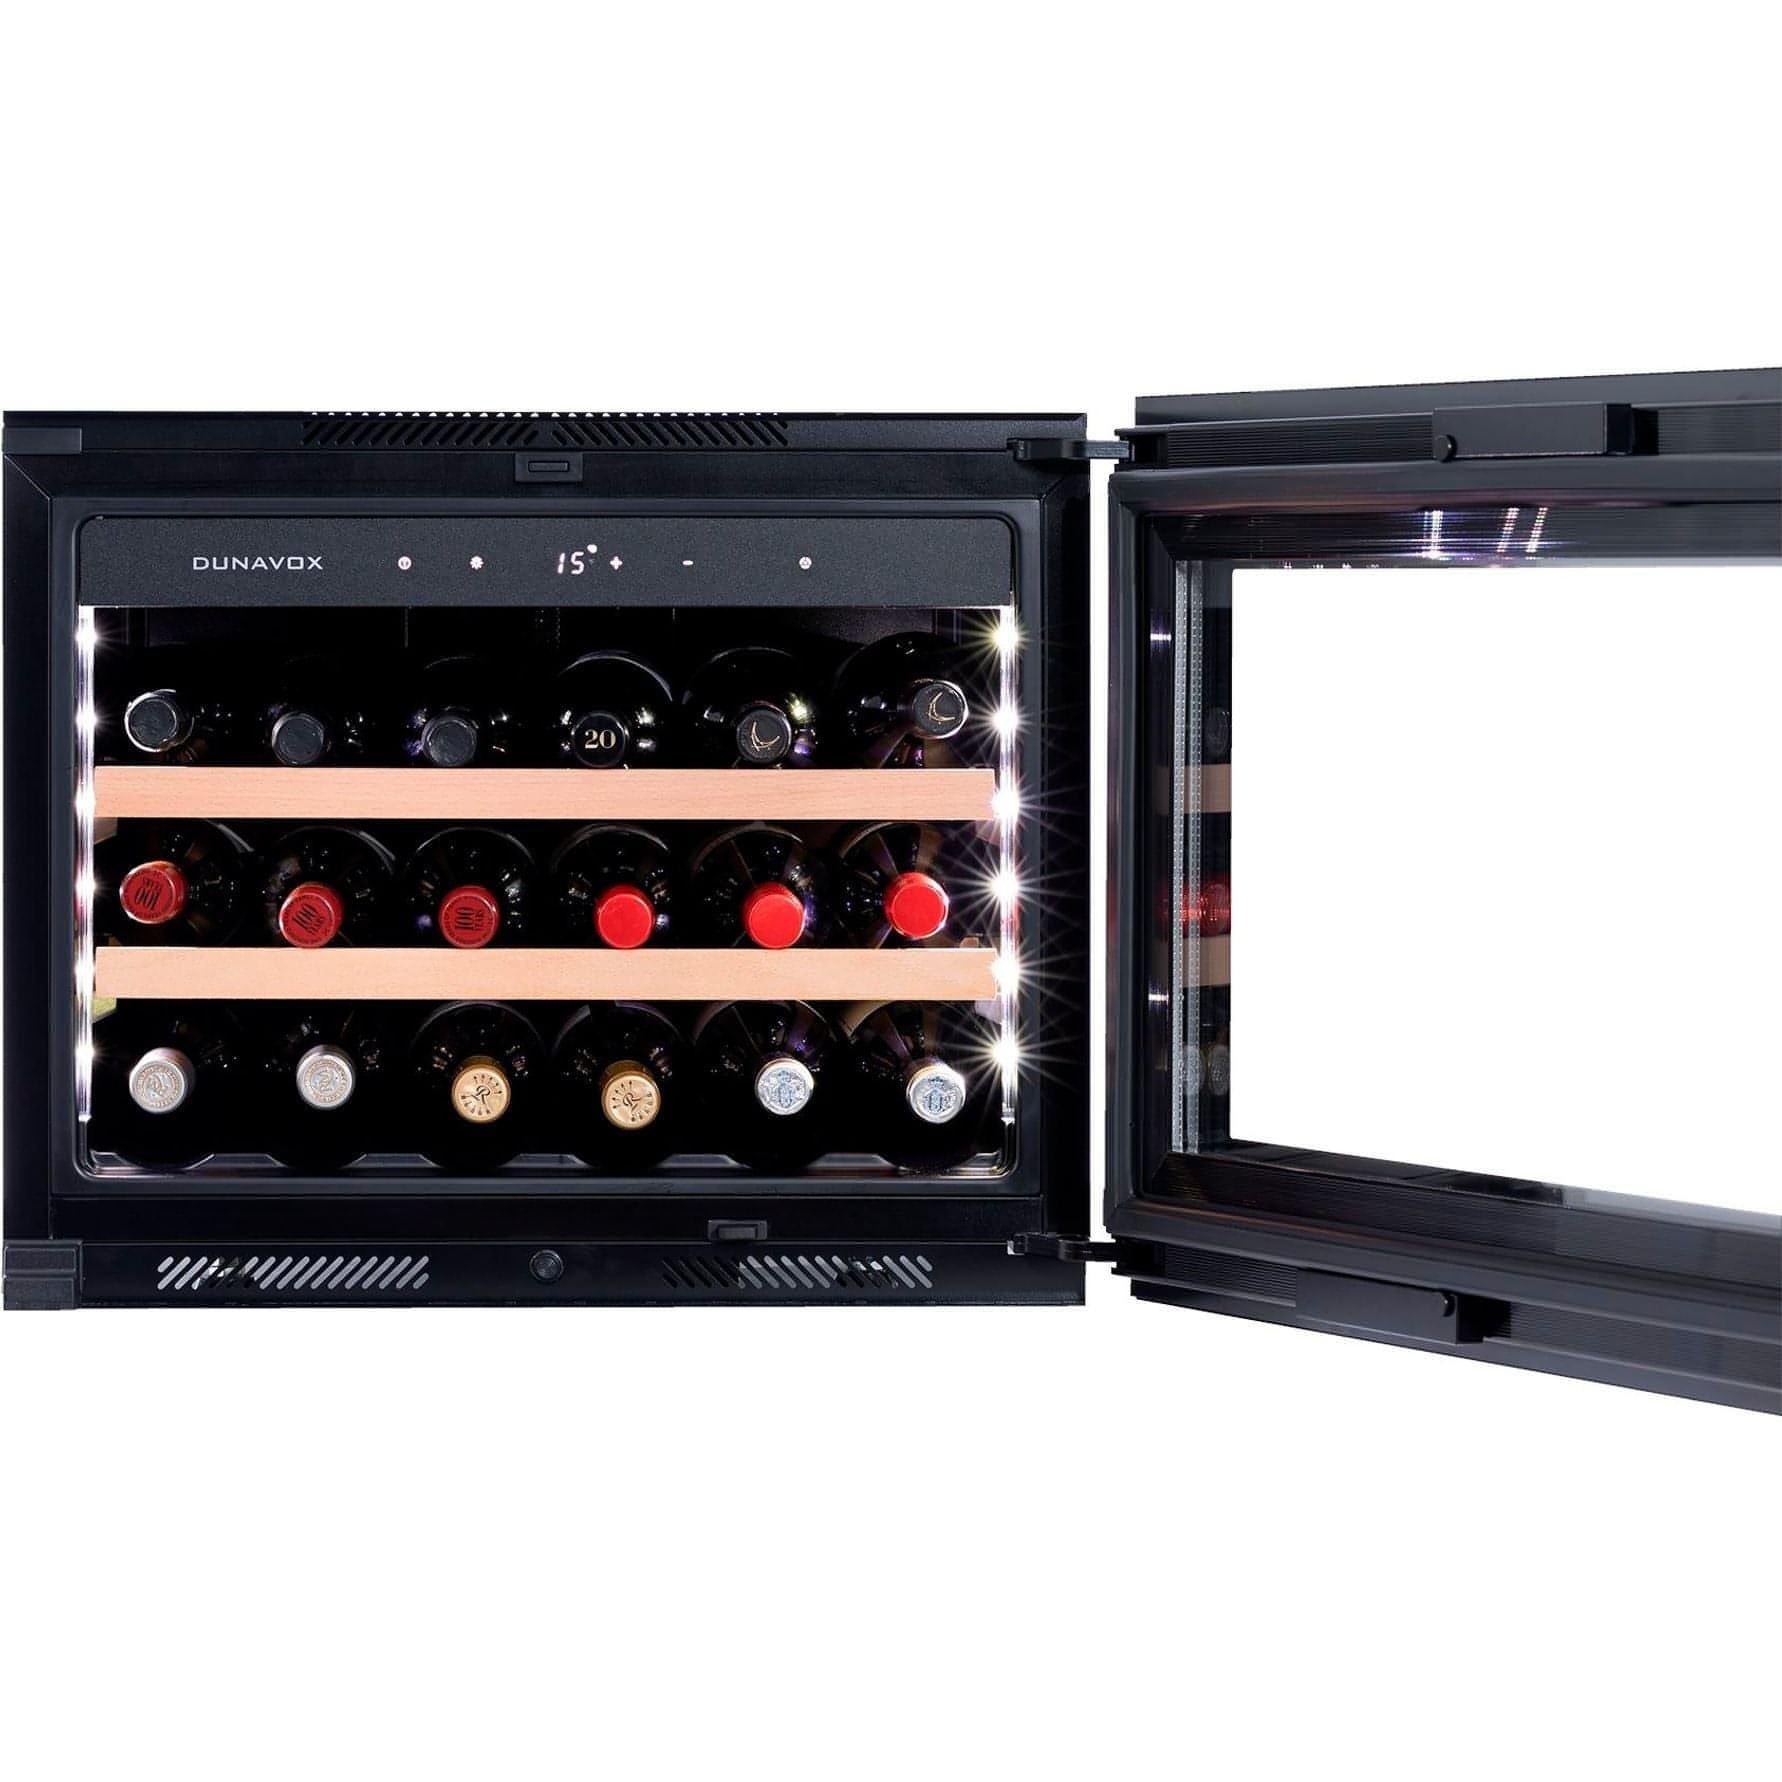 Dunavox GLANCE-18 - 18 Bottle - Built In / Integrated Wine Cooler - DAVG-18.46SS.TO